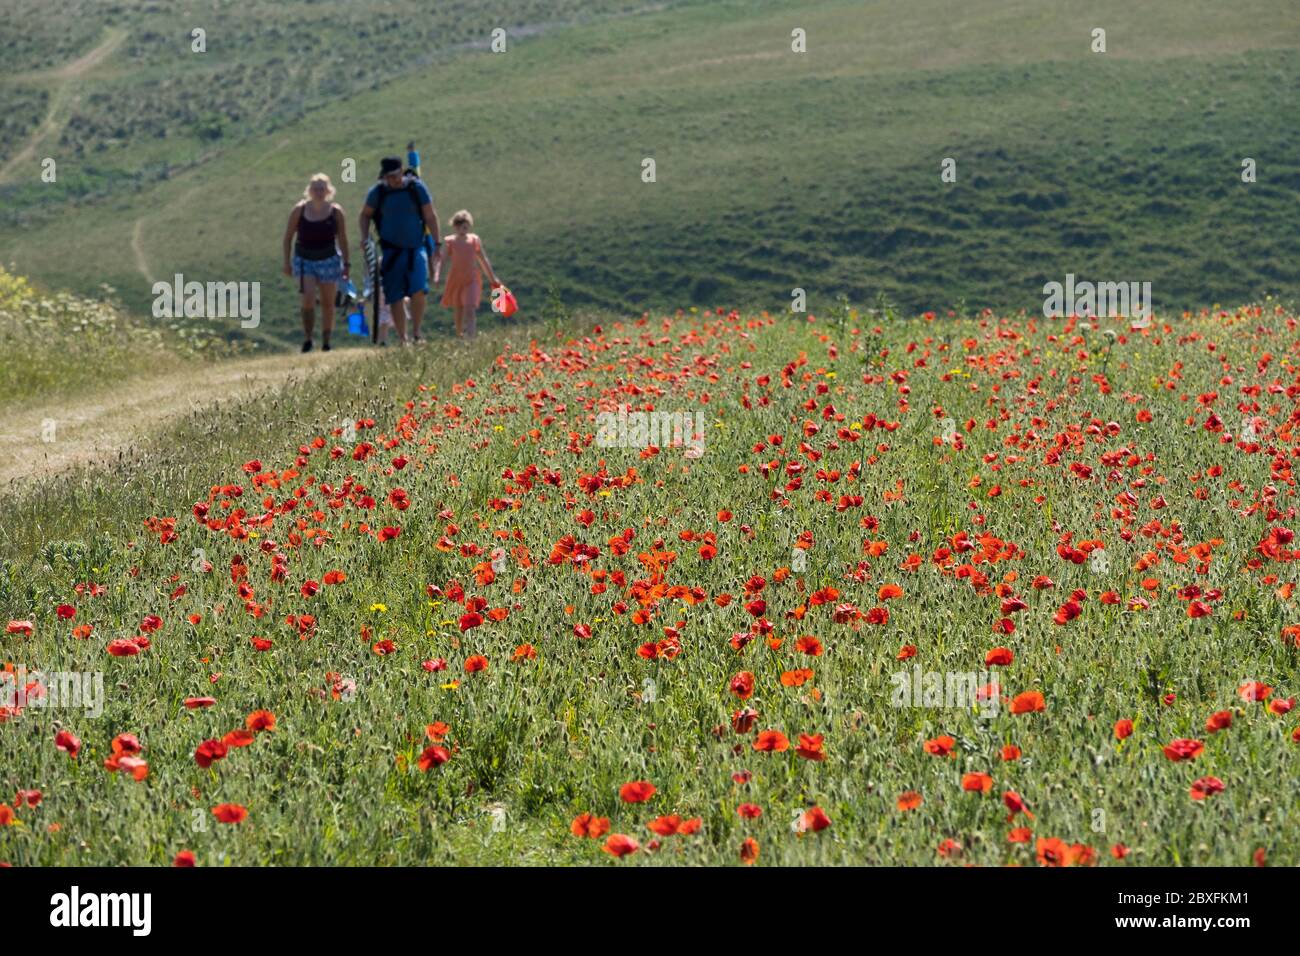 The spectacular sight of Common Poppies Papaver rhoeas growing in a field overlooking Polly Porth Joke as part of the Arable Fields Project on Pentire Stock Photo